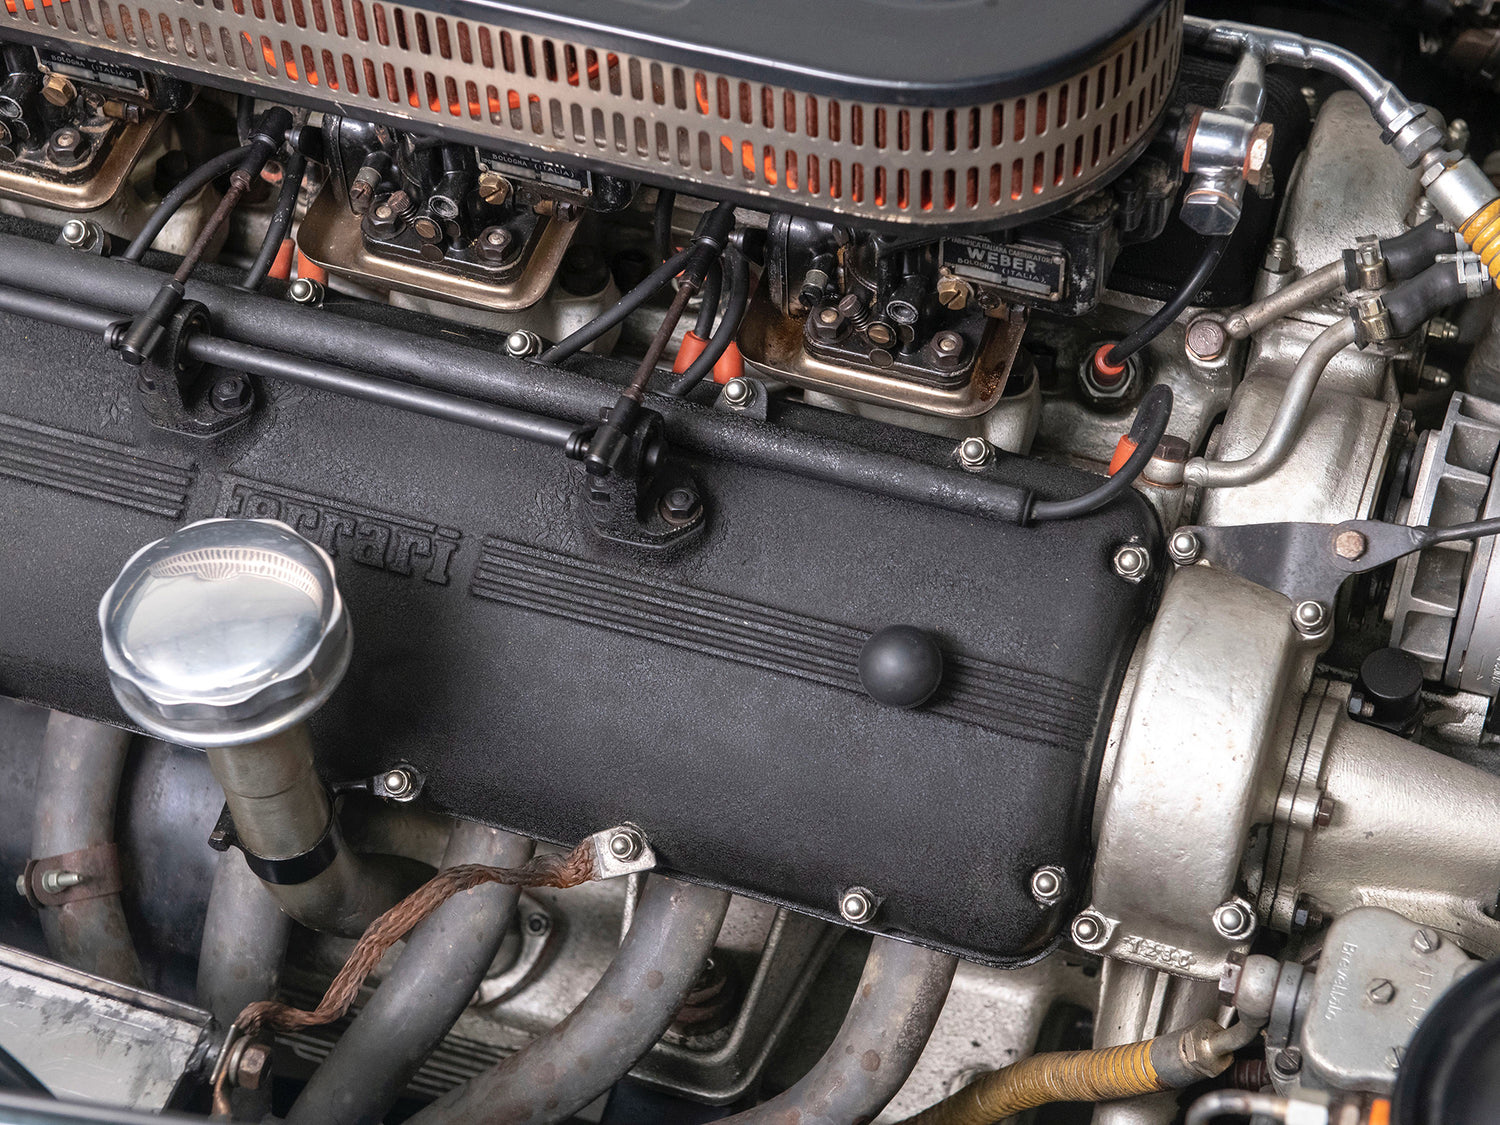 This is an original Ferrari 250 GT engine used in various classic Ferrari models. It shows the Weber caburettors aswell including some other engine components.